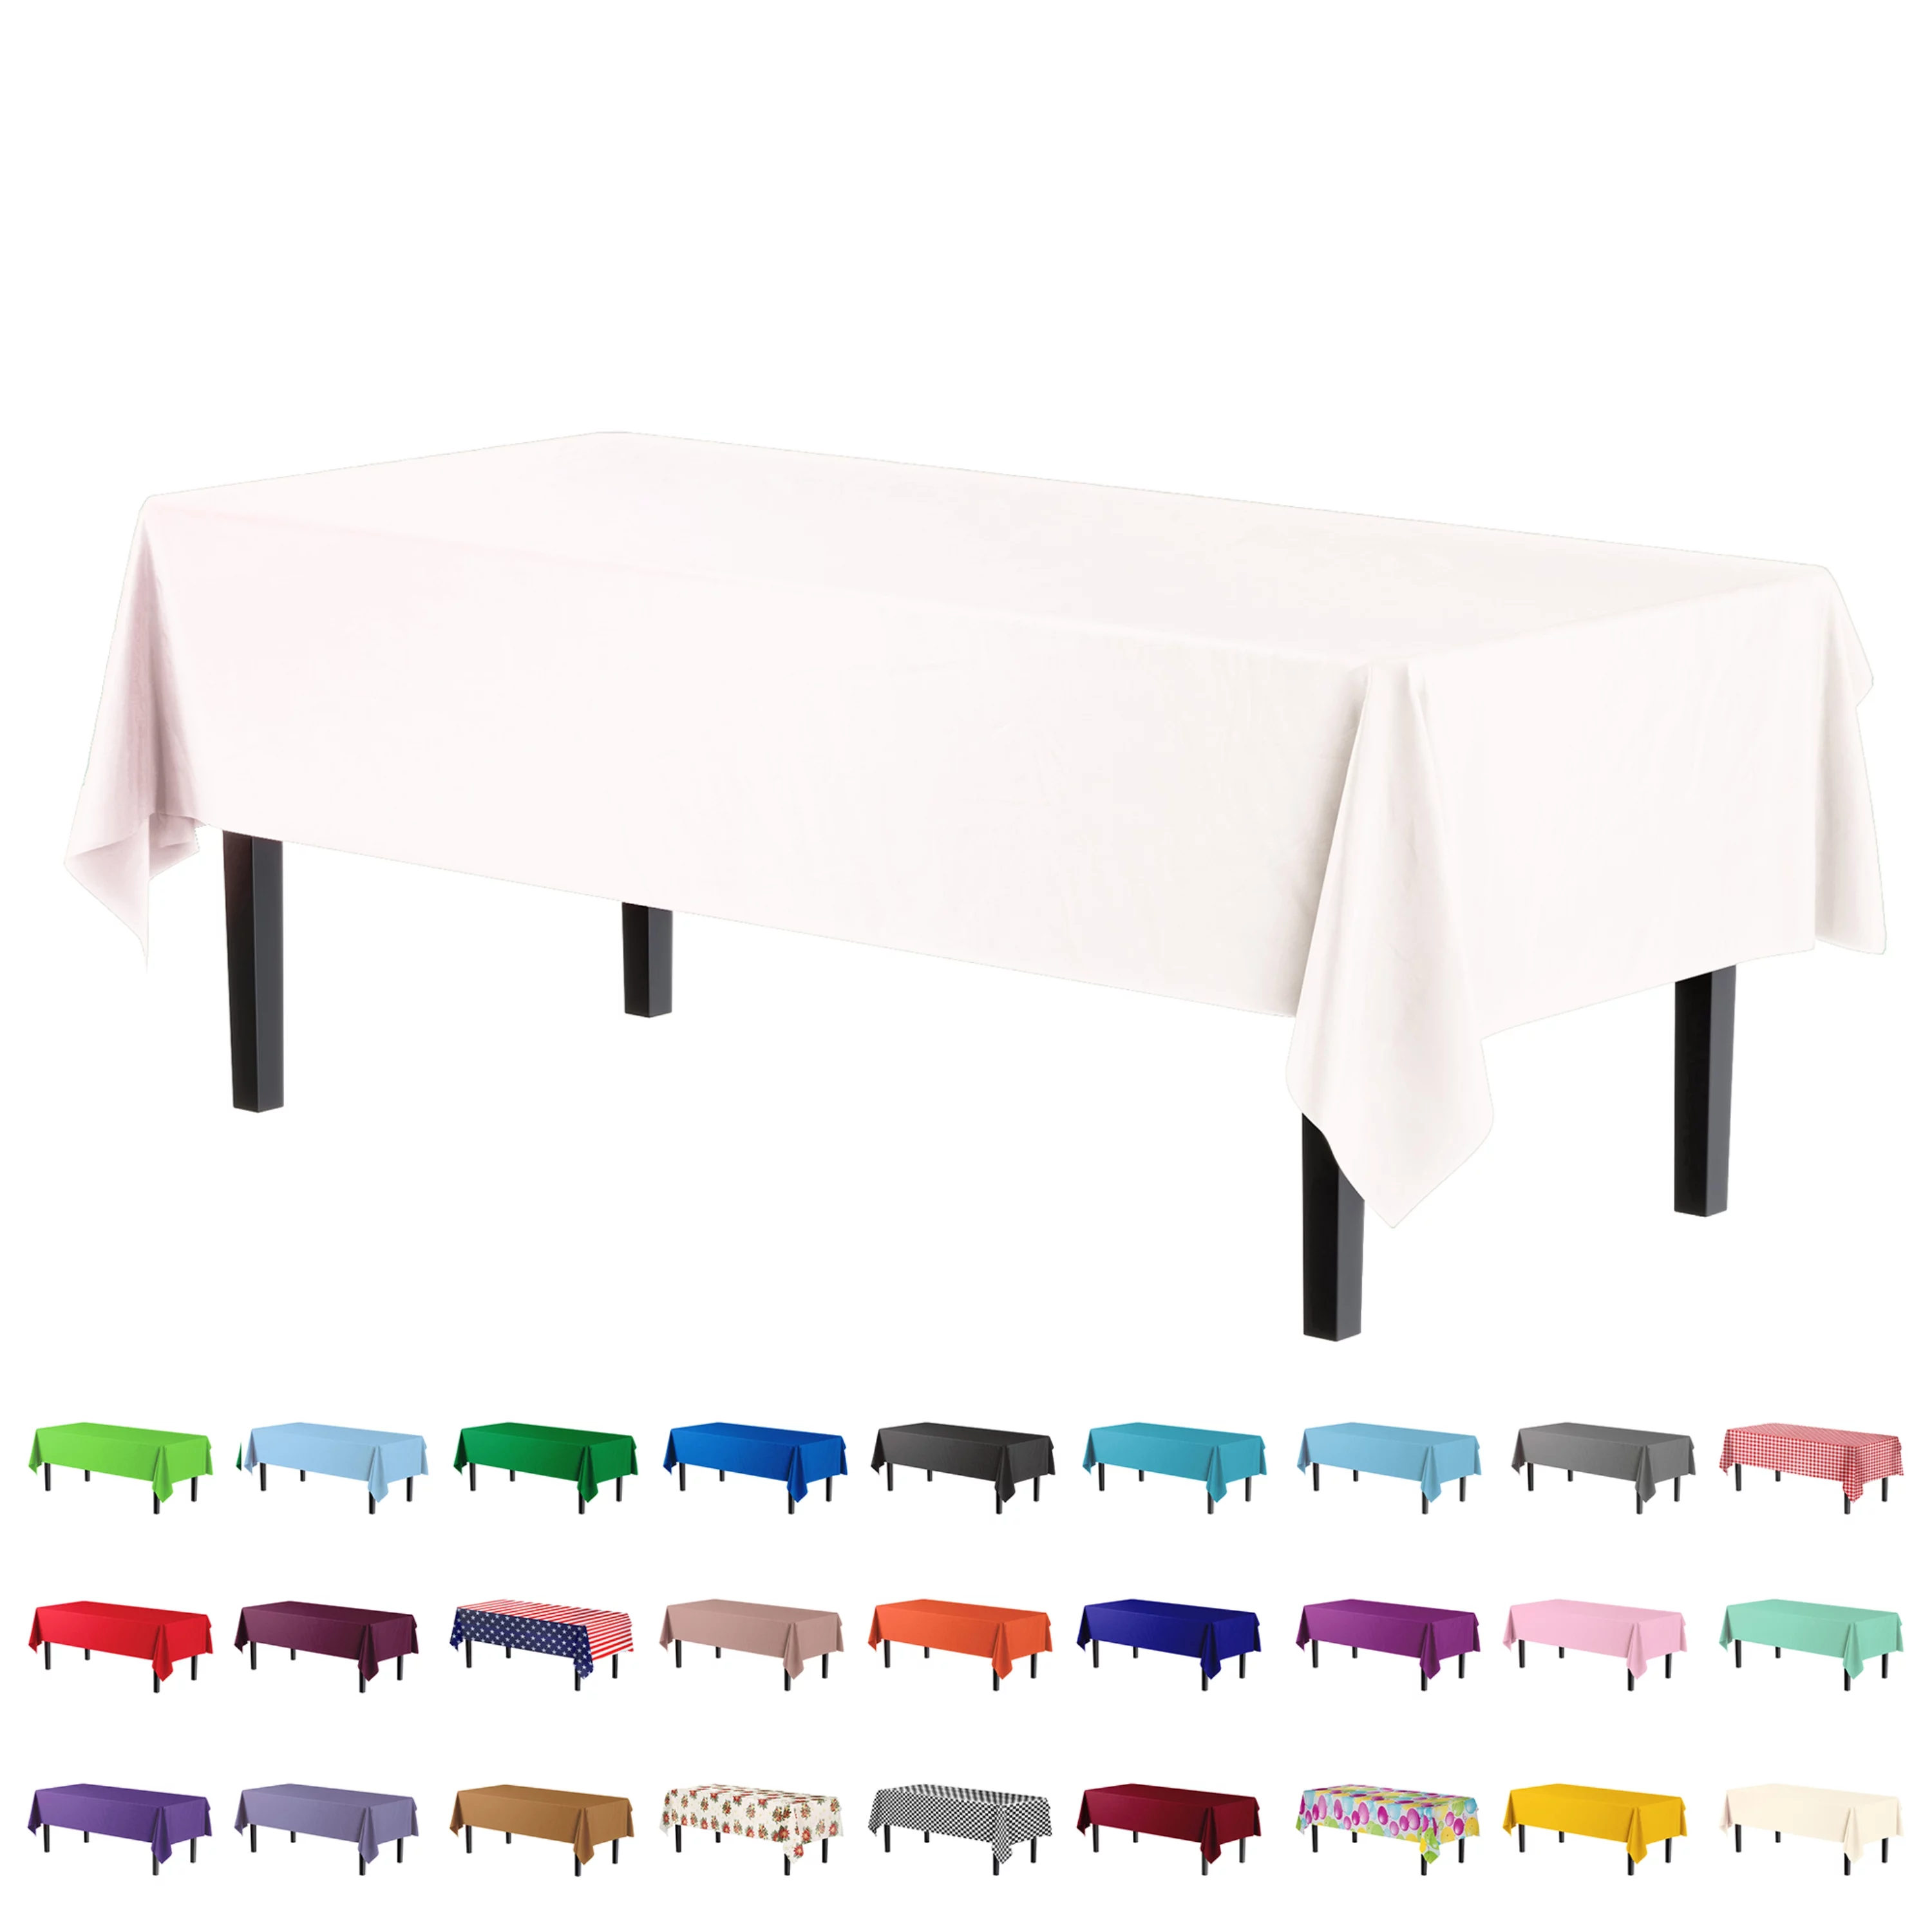 Exquisite White Plastic Tablecloth Cover - 54" x 108" - Heavy Duty - Disposable - Single Count